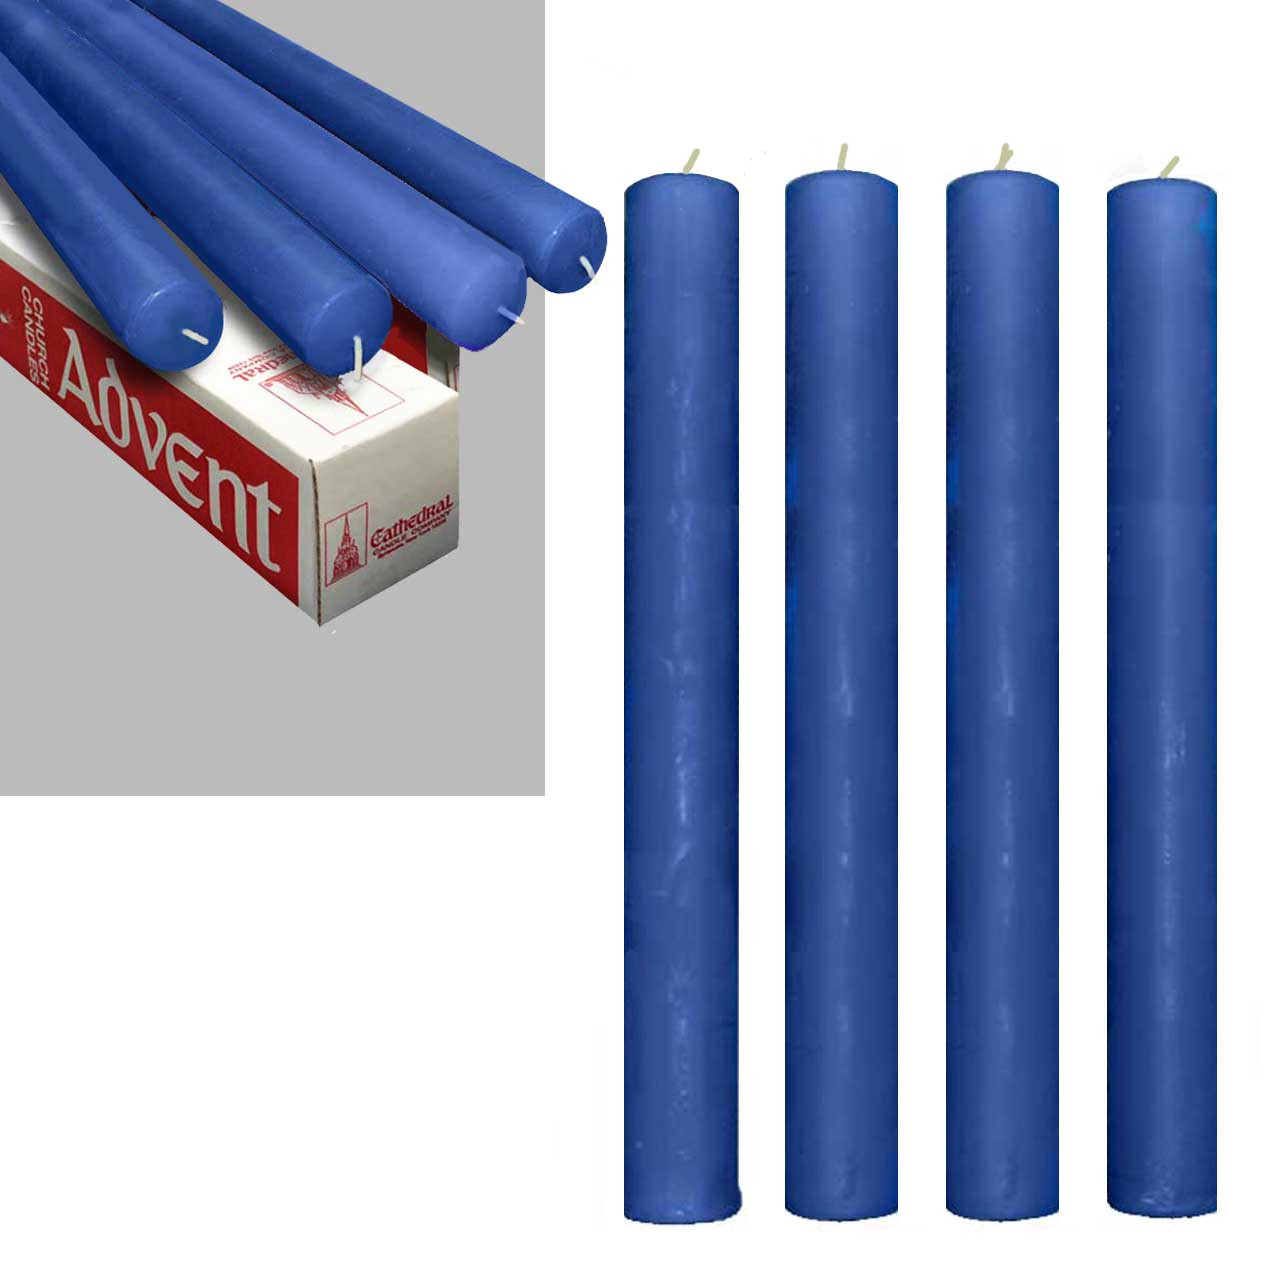 1-1/2"x16" Sarum Blue 51% Beeswax:  Advent Candles